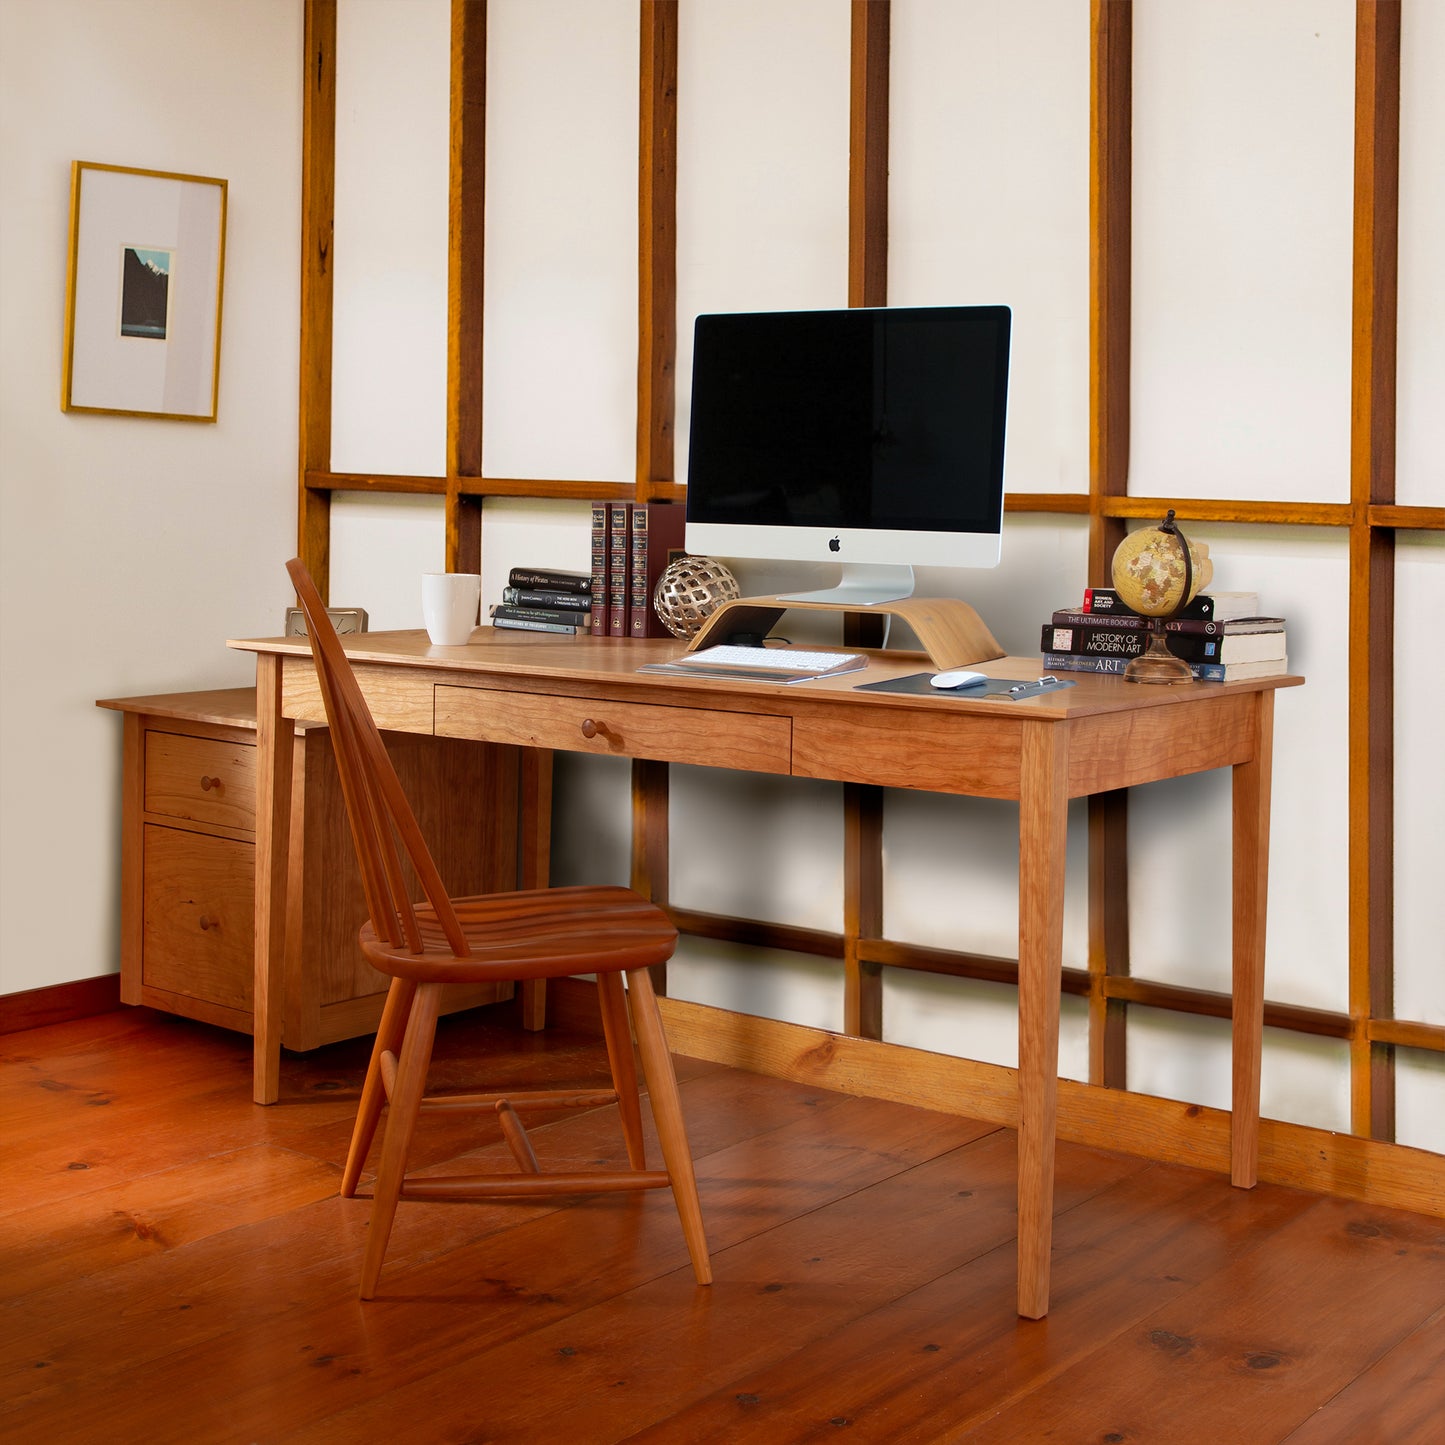 A tidy home office setup features a Maple Corner Woodworks American Shaker Writing Desk, imac computer, and a wooden chair on sustainably harvested hardwood floor, accented by minimalistic decor and framed art on the wall.